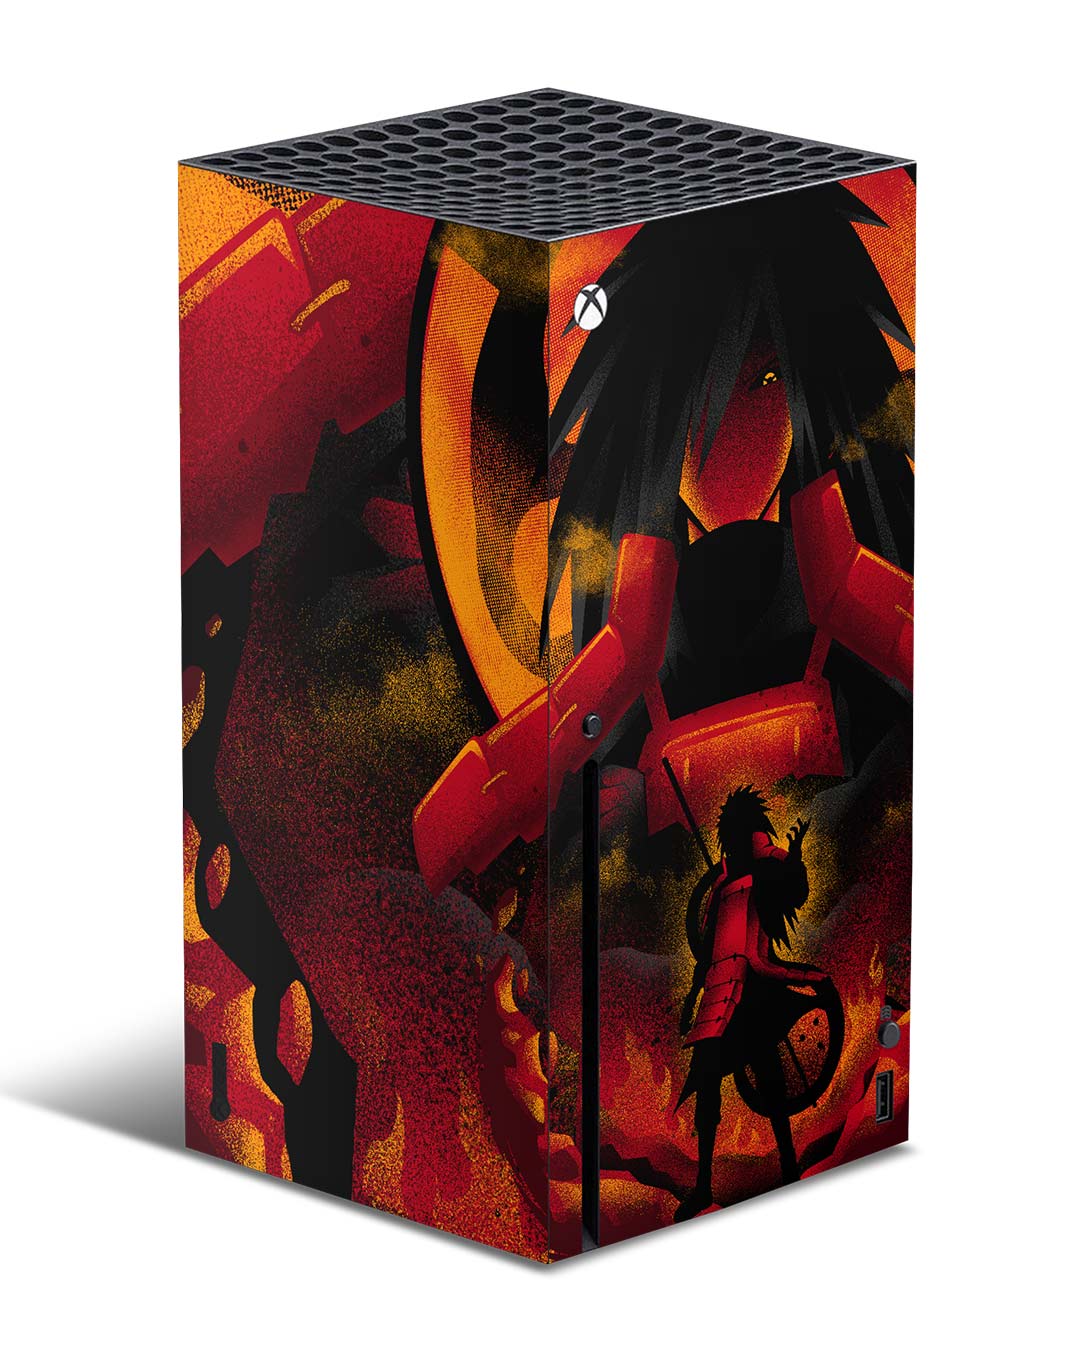 John-117 - Xbox Series X Console Skin | Console Wraps and Stickers